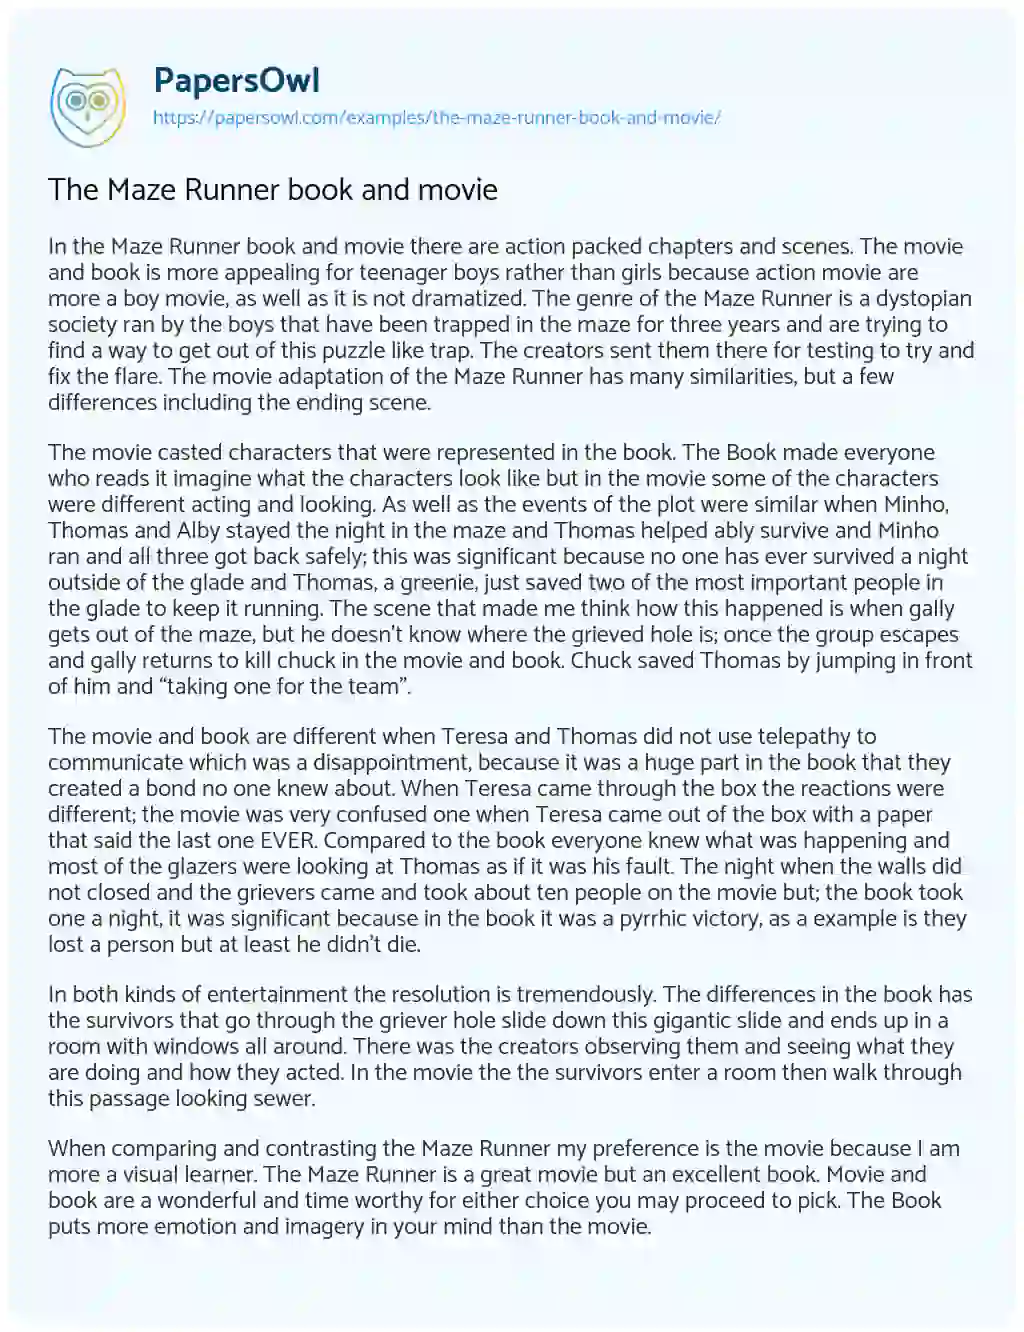 Essay on The Maze Runner Book and Movie